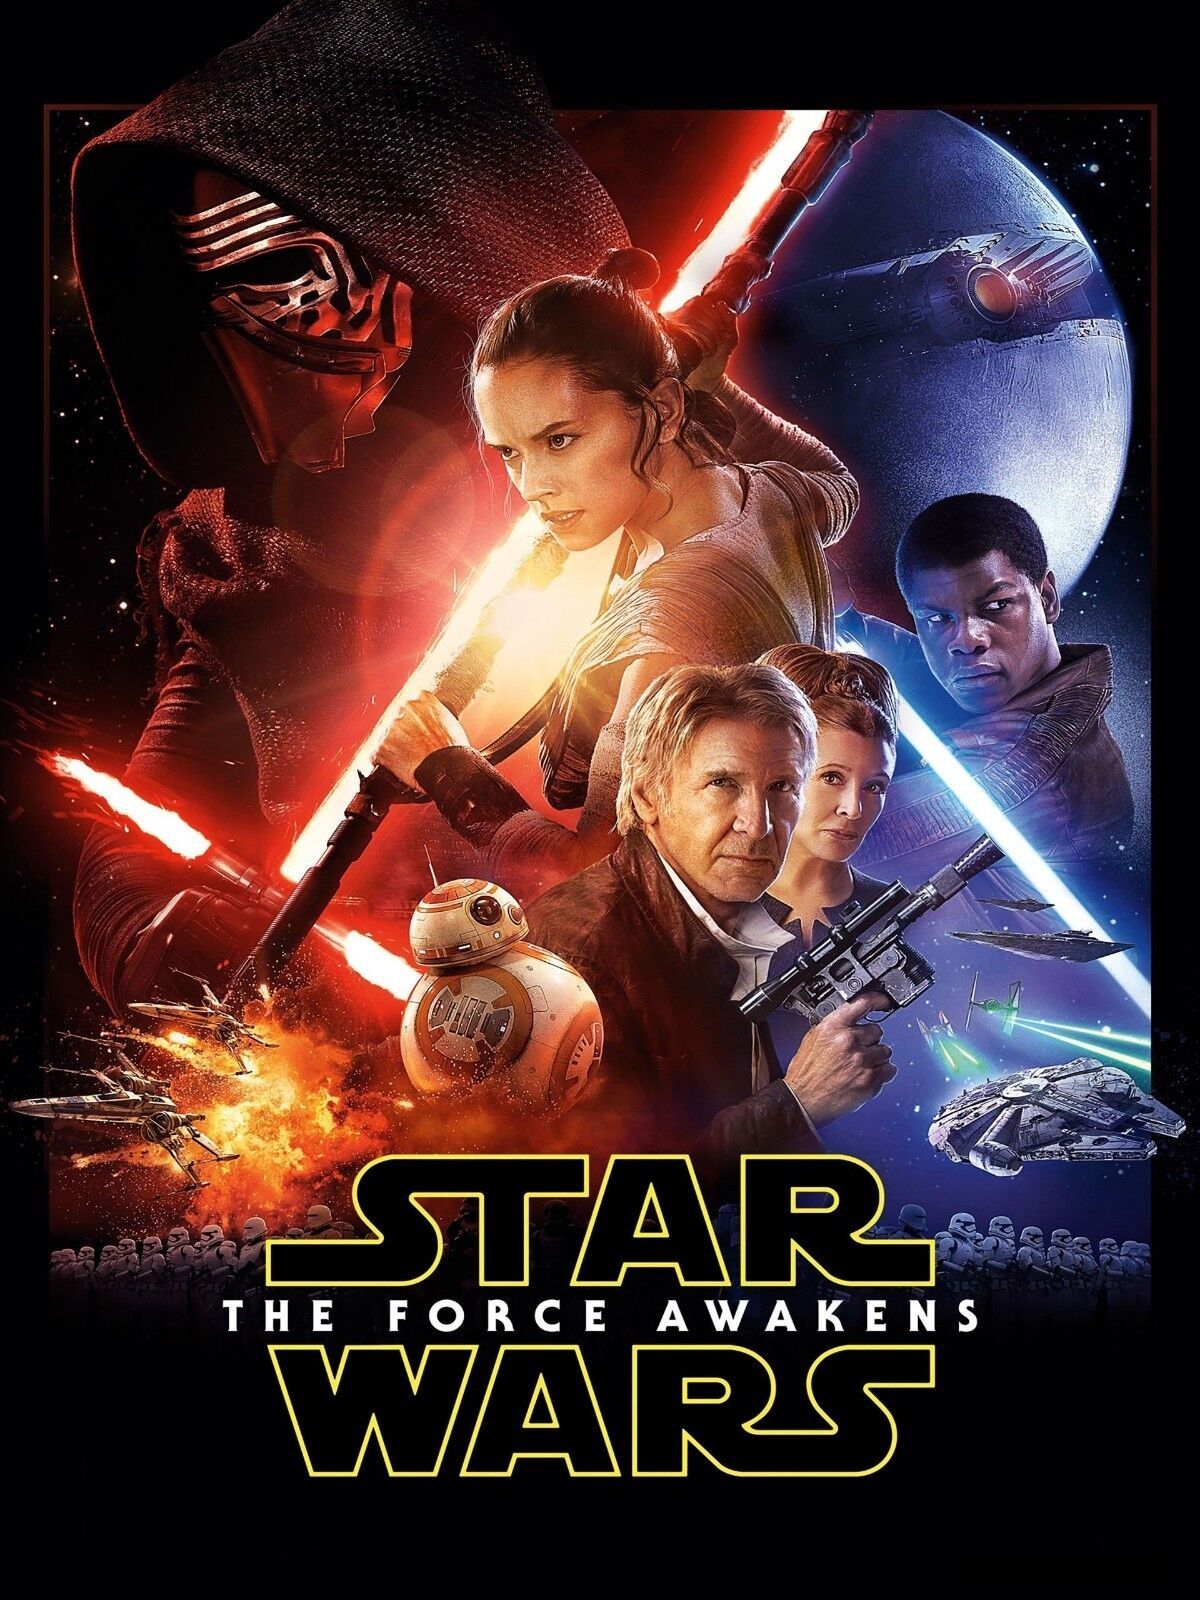 Star Wars Awakens The Force Poster